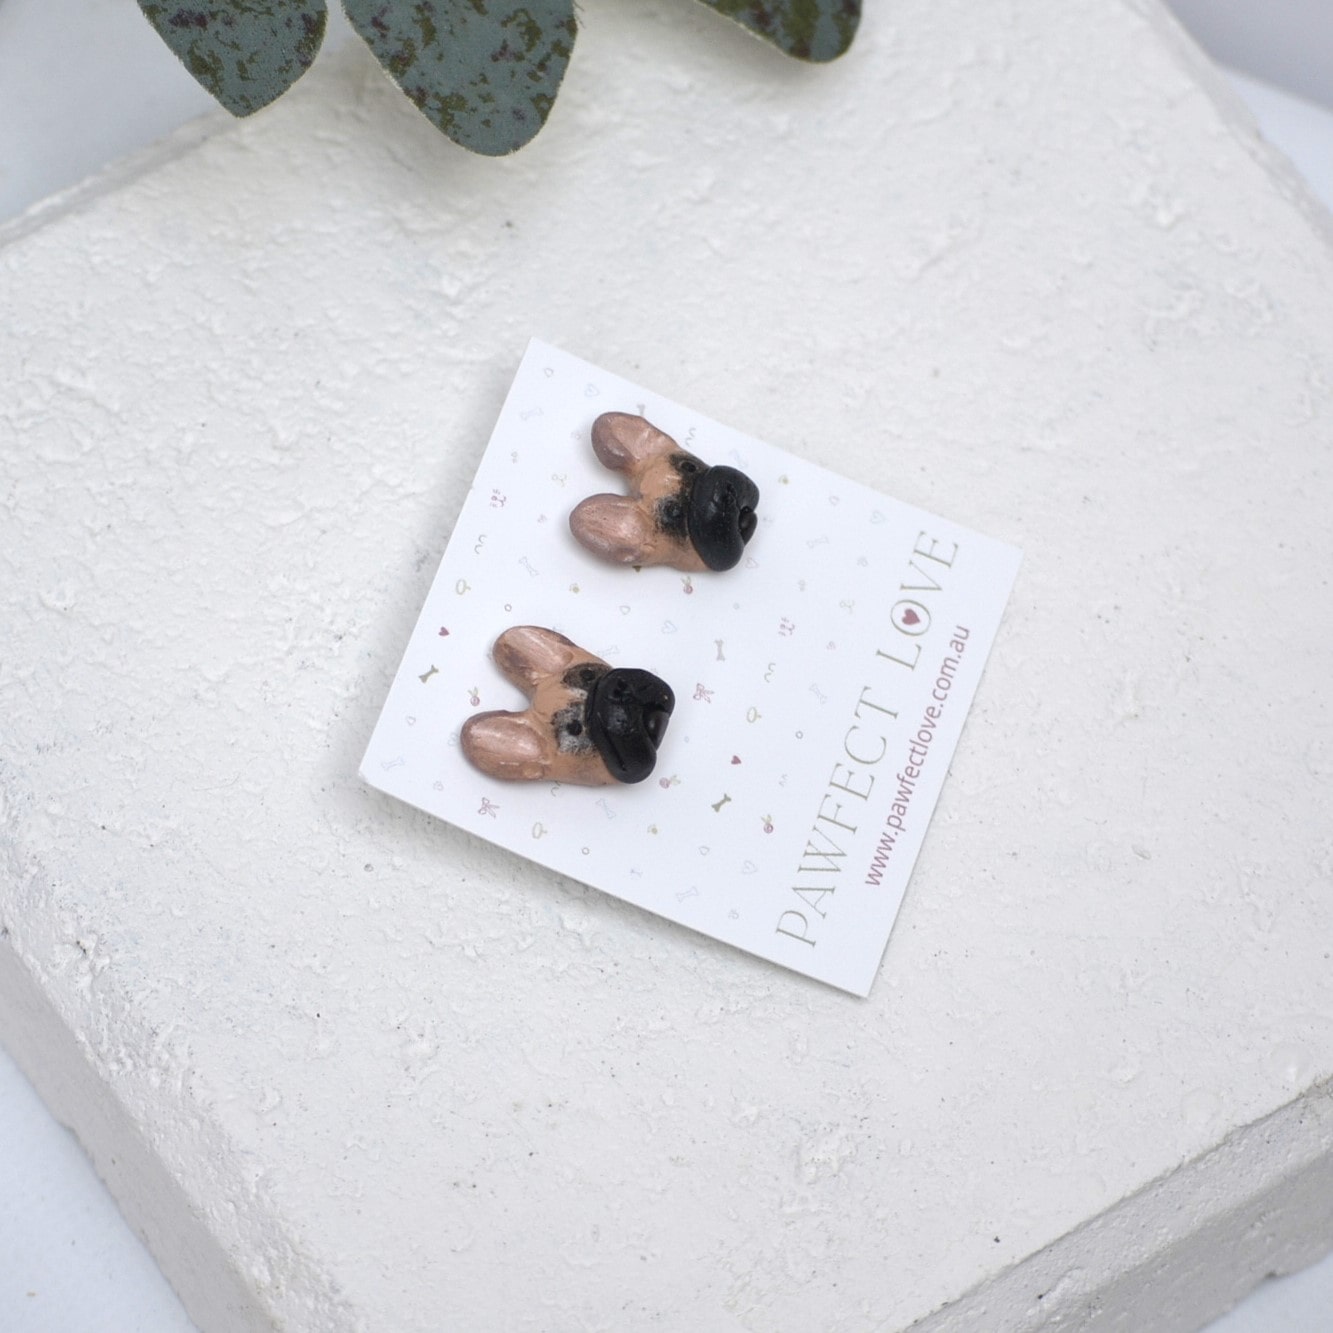 Handmade French bulldog stud earrings by Pawfect Love, positioned on white paver background